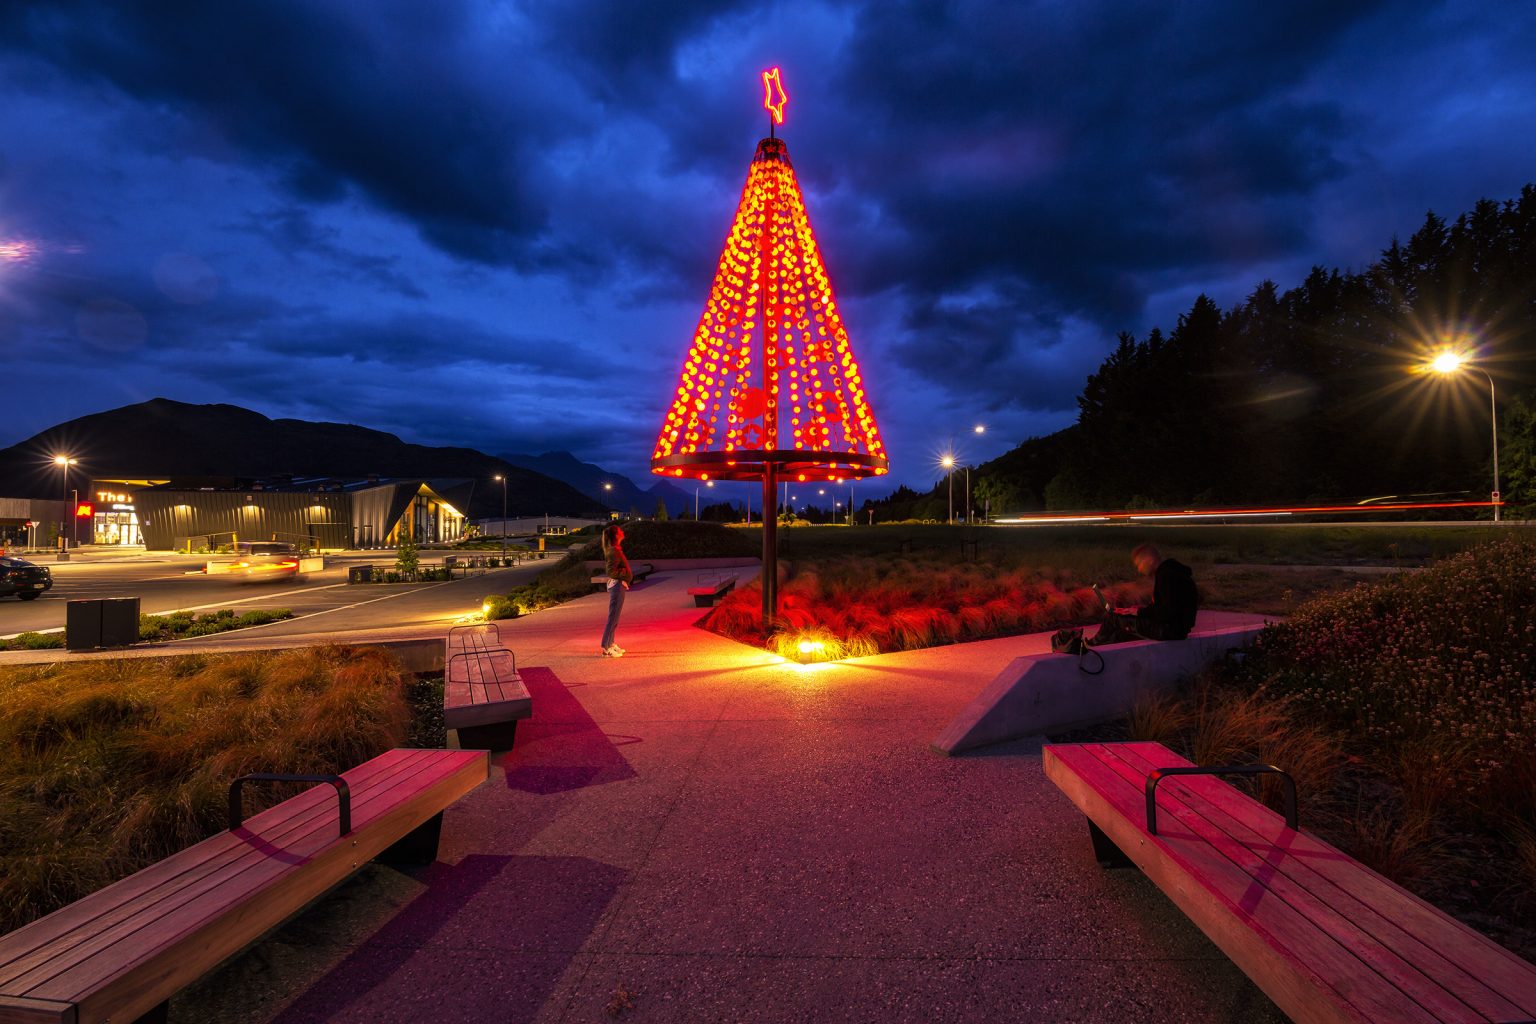 A new shine on Christmas for Queenstown Queenstown Central Shopping